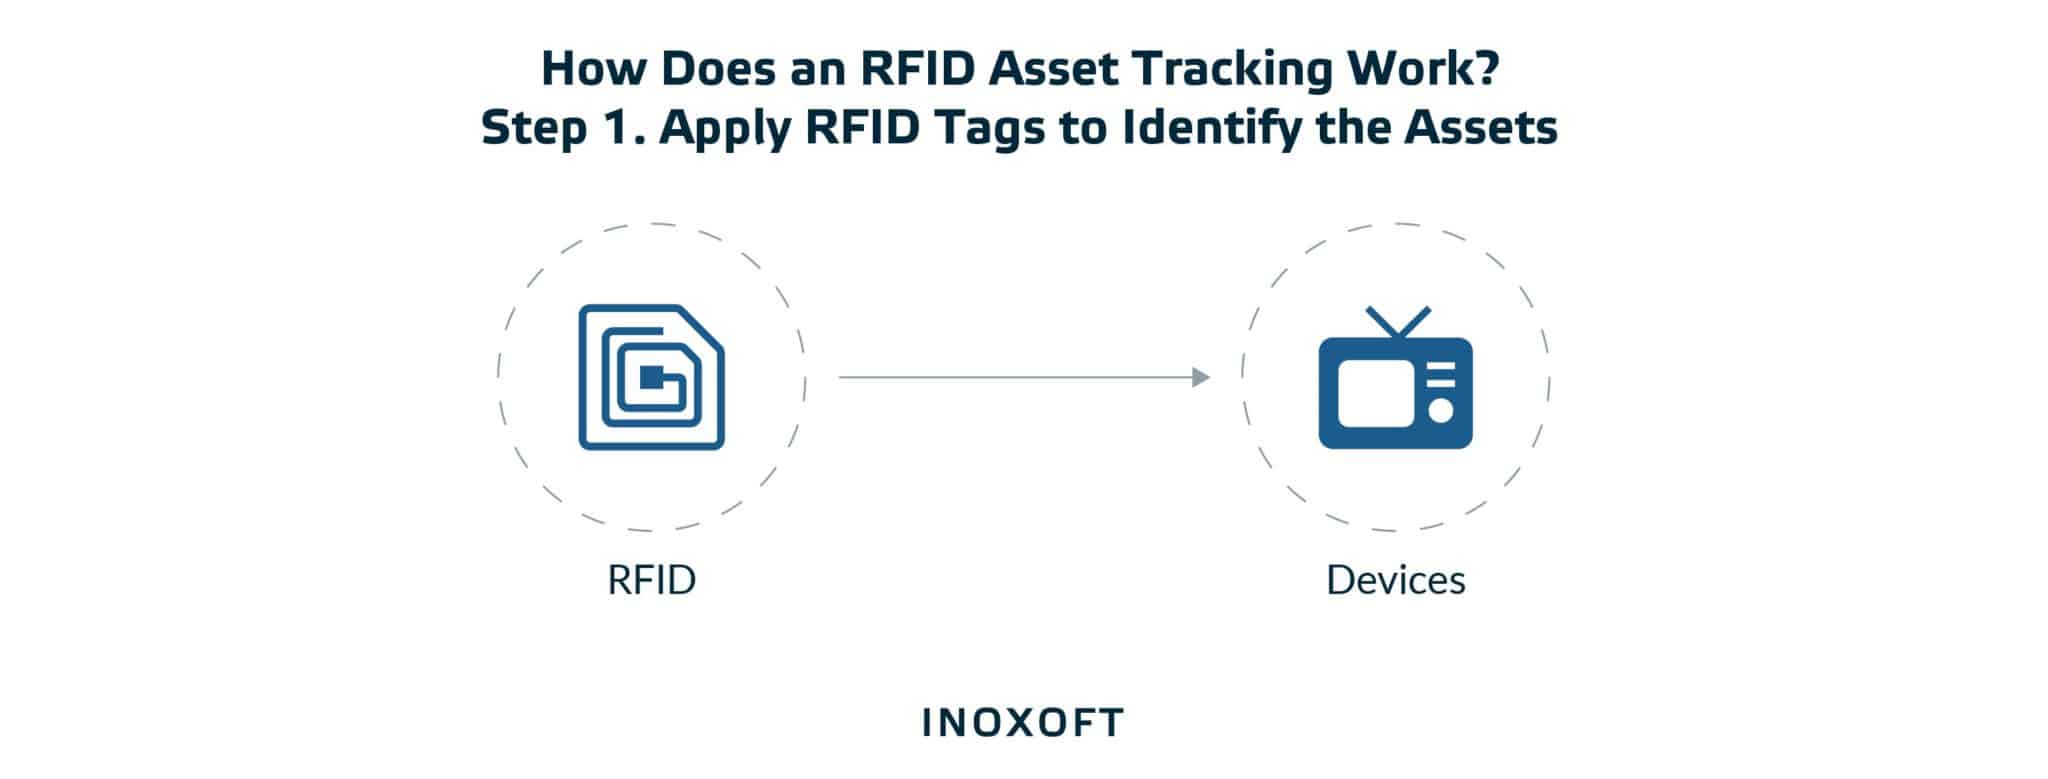 RFID Tags to Identify the Assets